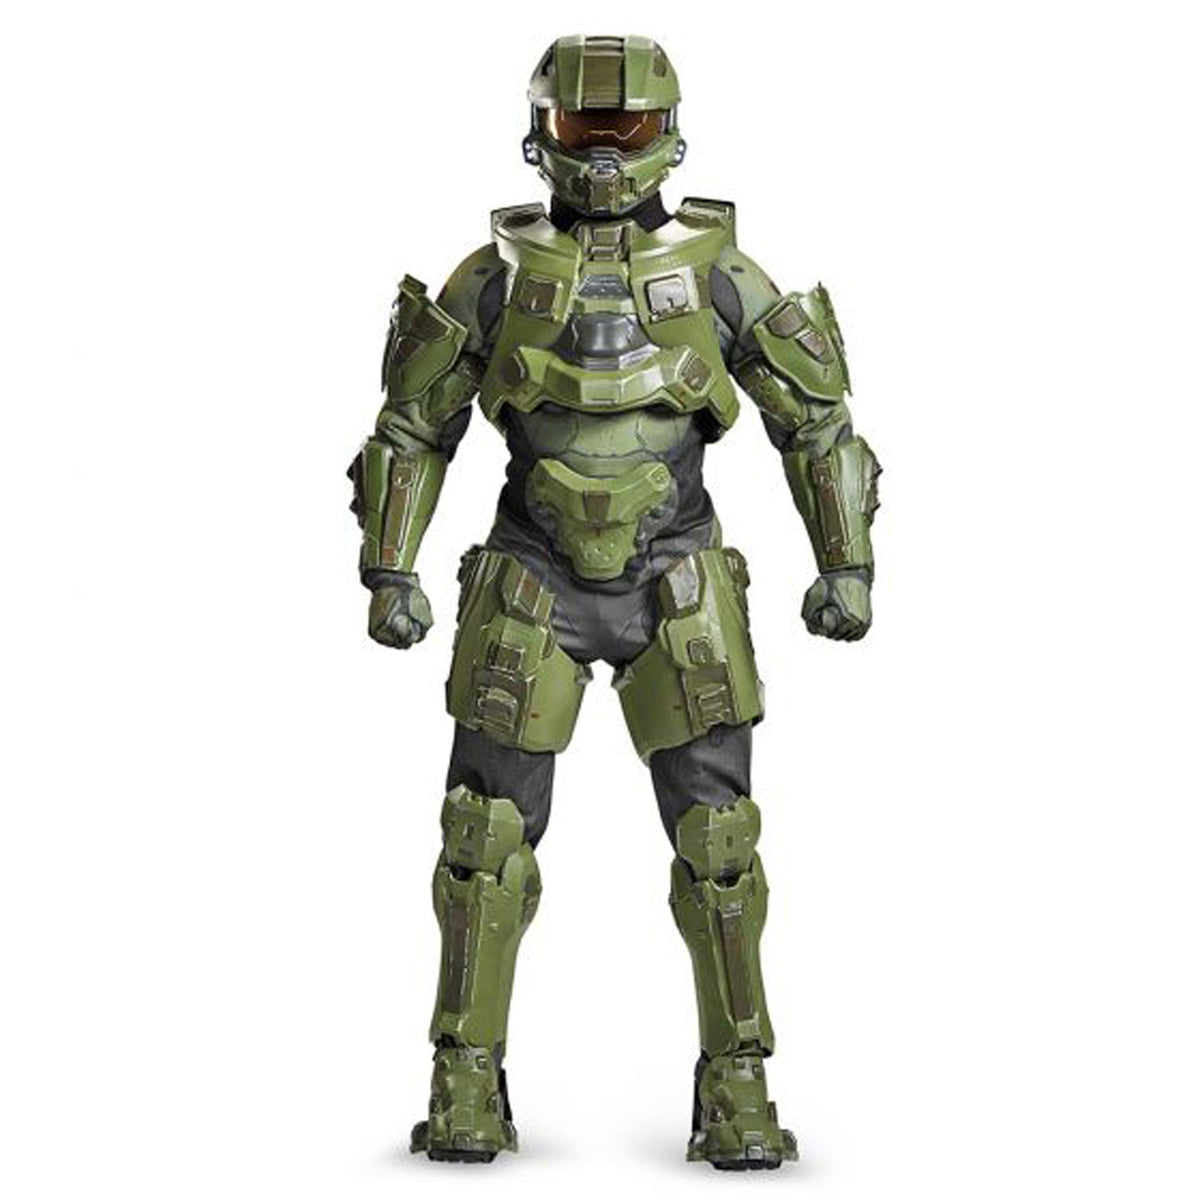 DISGUISE (TOY-SPORT) Costumes Halo Master Chief Ultra Prestige Costume for Adults 039897975658